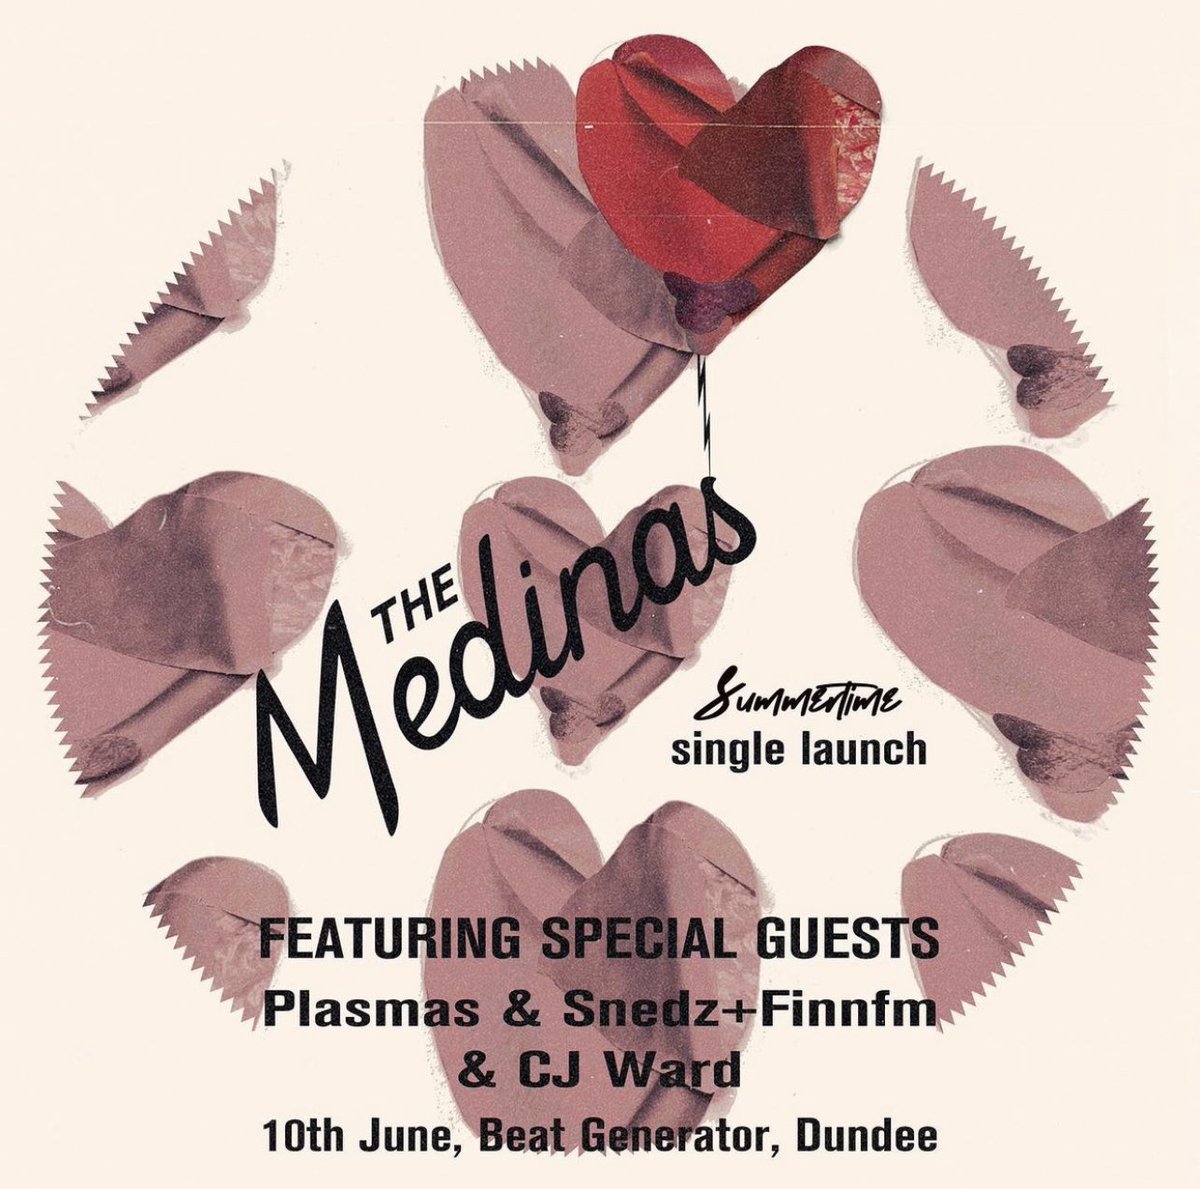 SUMMERTIME SINGLE LAUNCH Friday 10th June @beatgenlive We’ll be celebrating the release of our new single ‘Summertime’ w out pals PLASMAS, Snedzz, @finn_fm99 and CJ Ward. We’re so excited to let you all hear this , it’s our favourite to date!